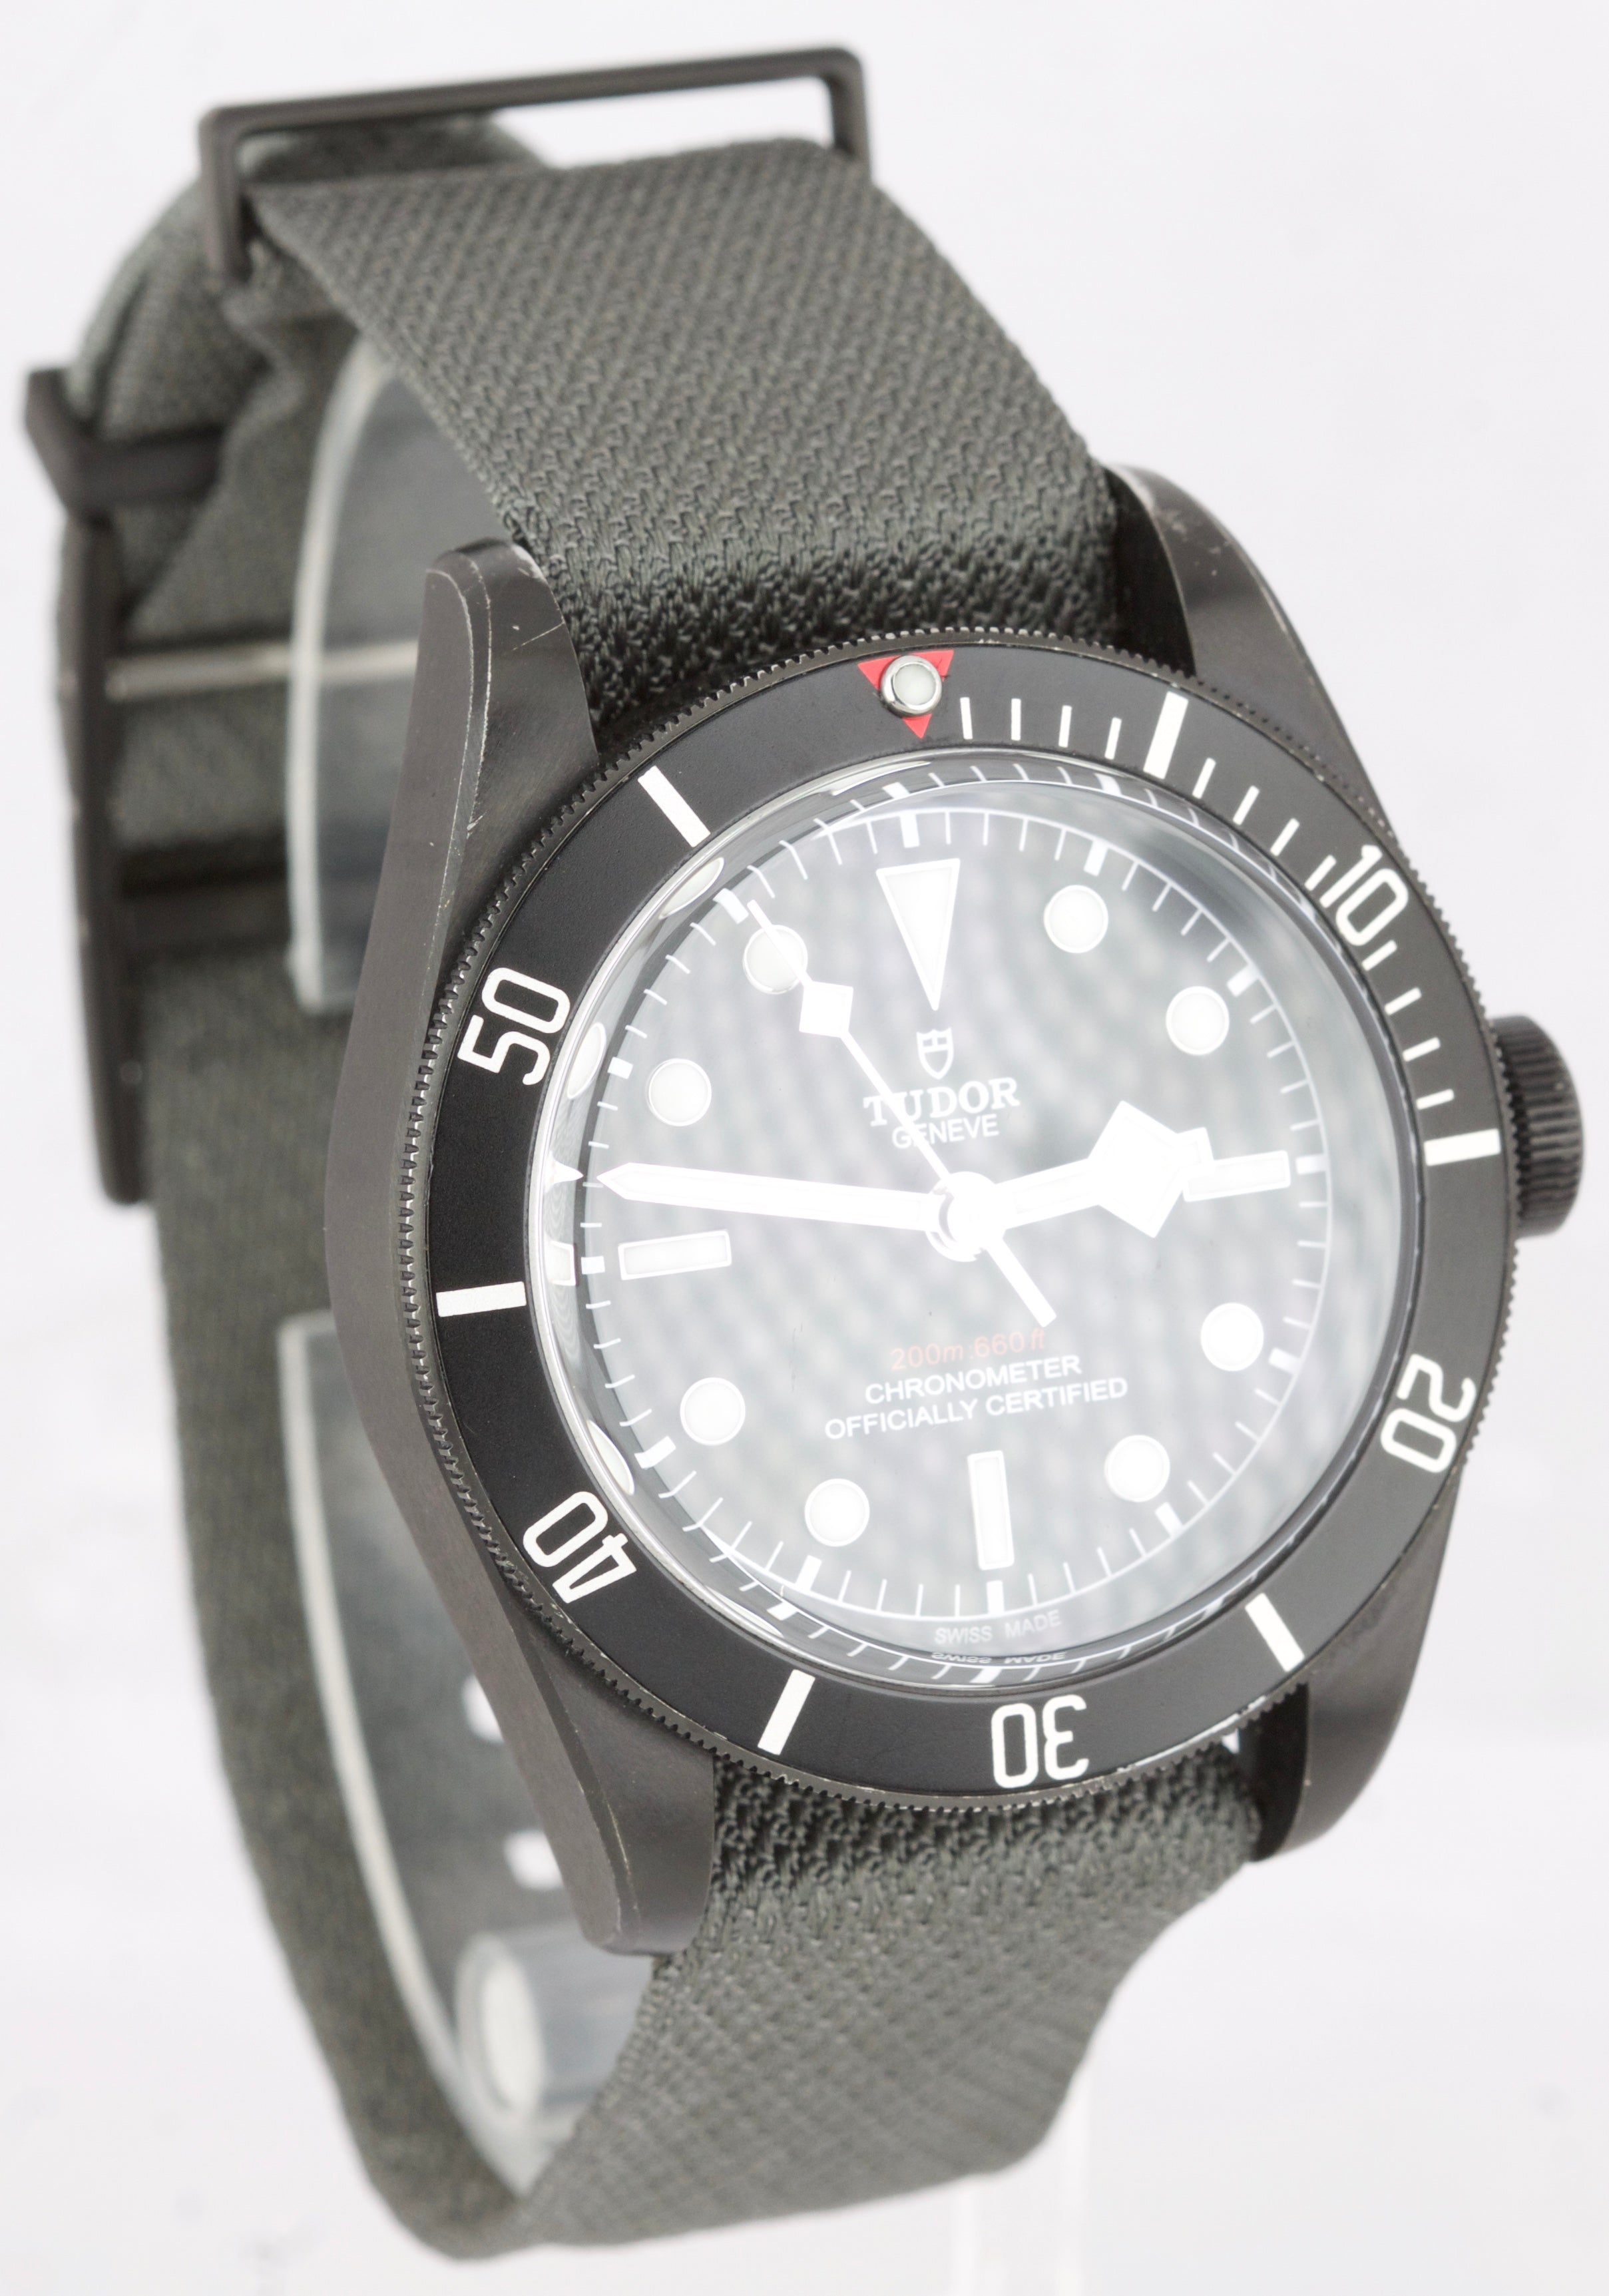 2019 Tudor Heritage Black Bay 79230 DK PVD Dark Stainless Automatic  41mm Watch